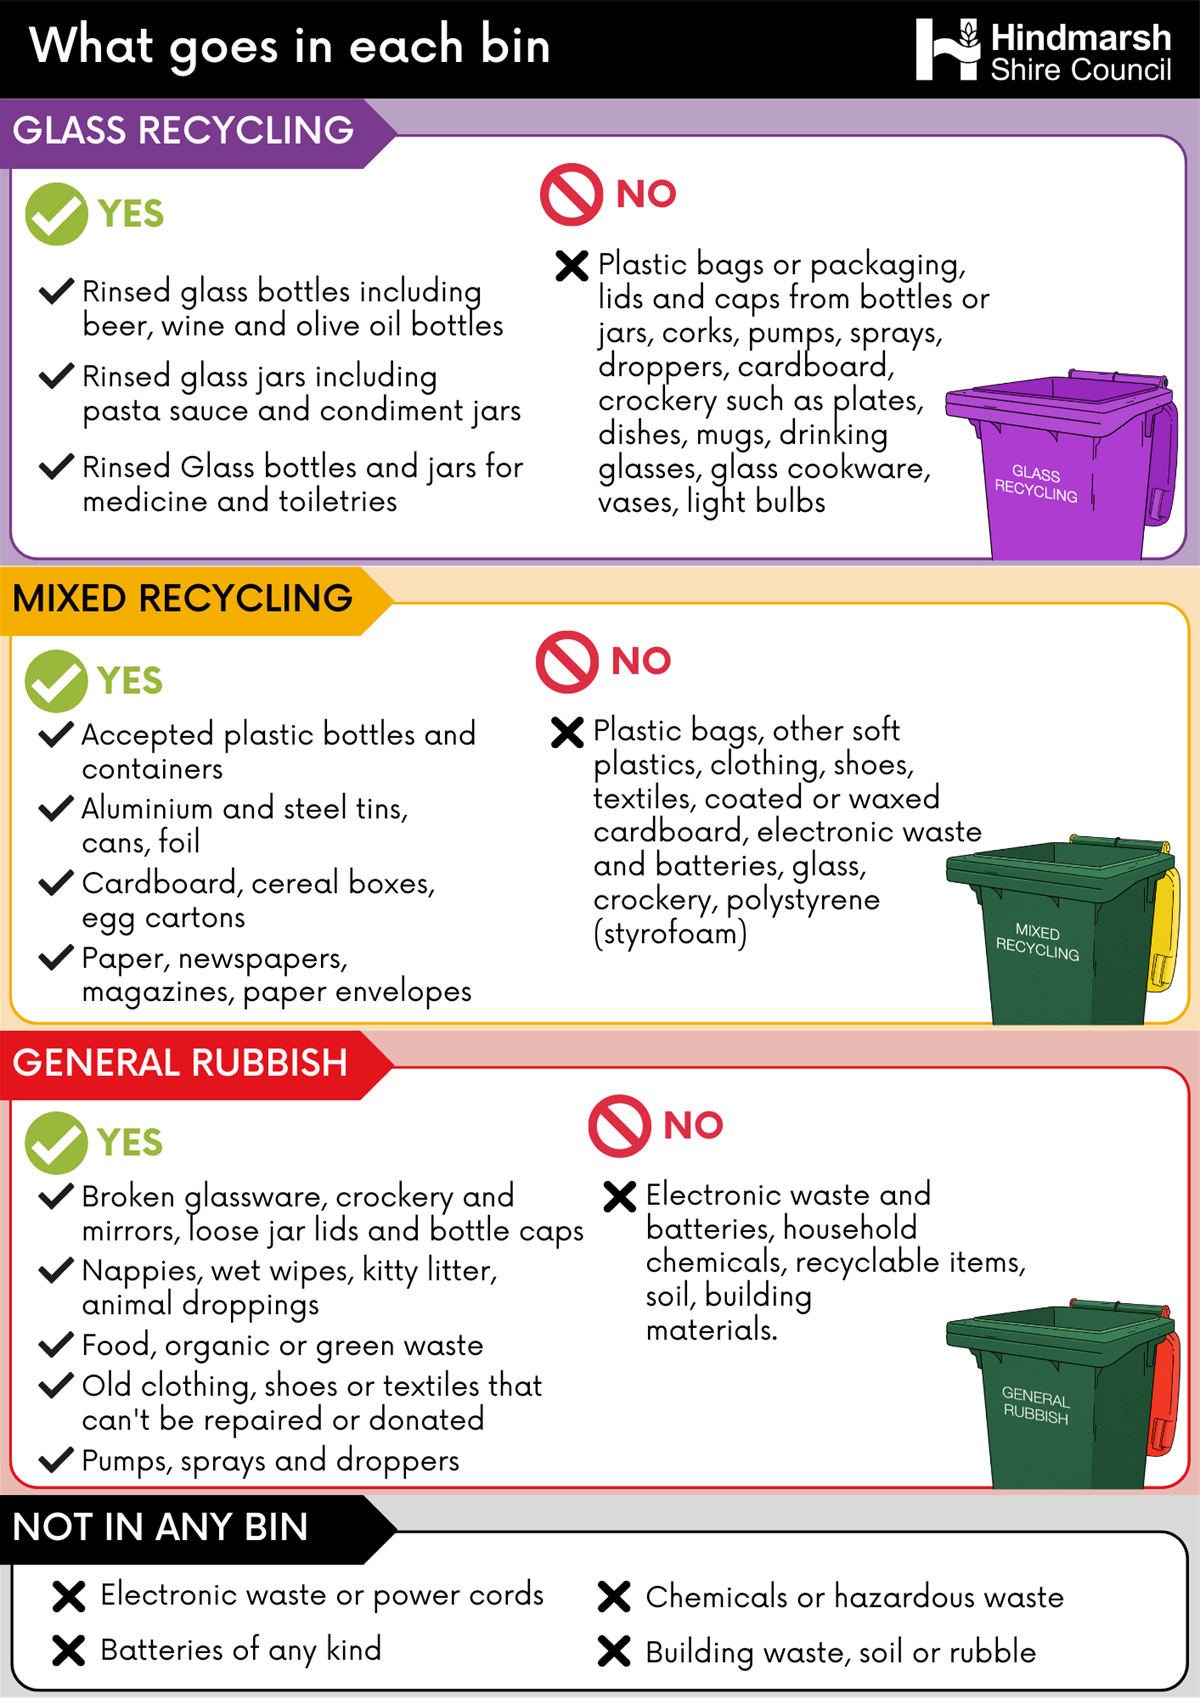 What goes in each bin poster.png